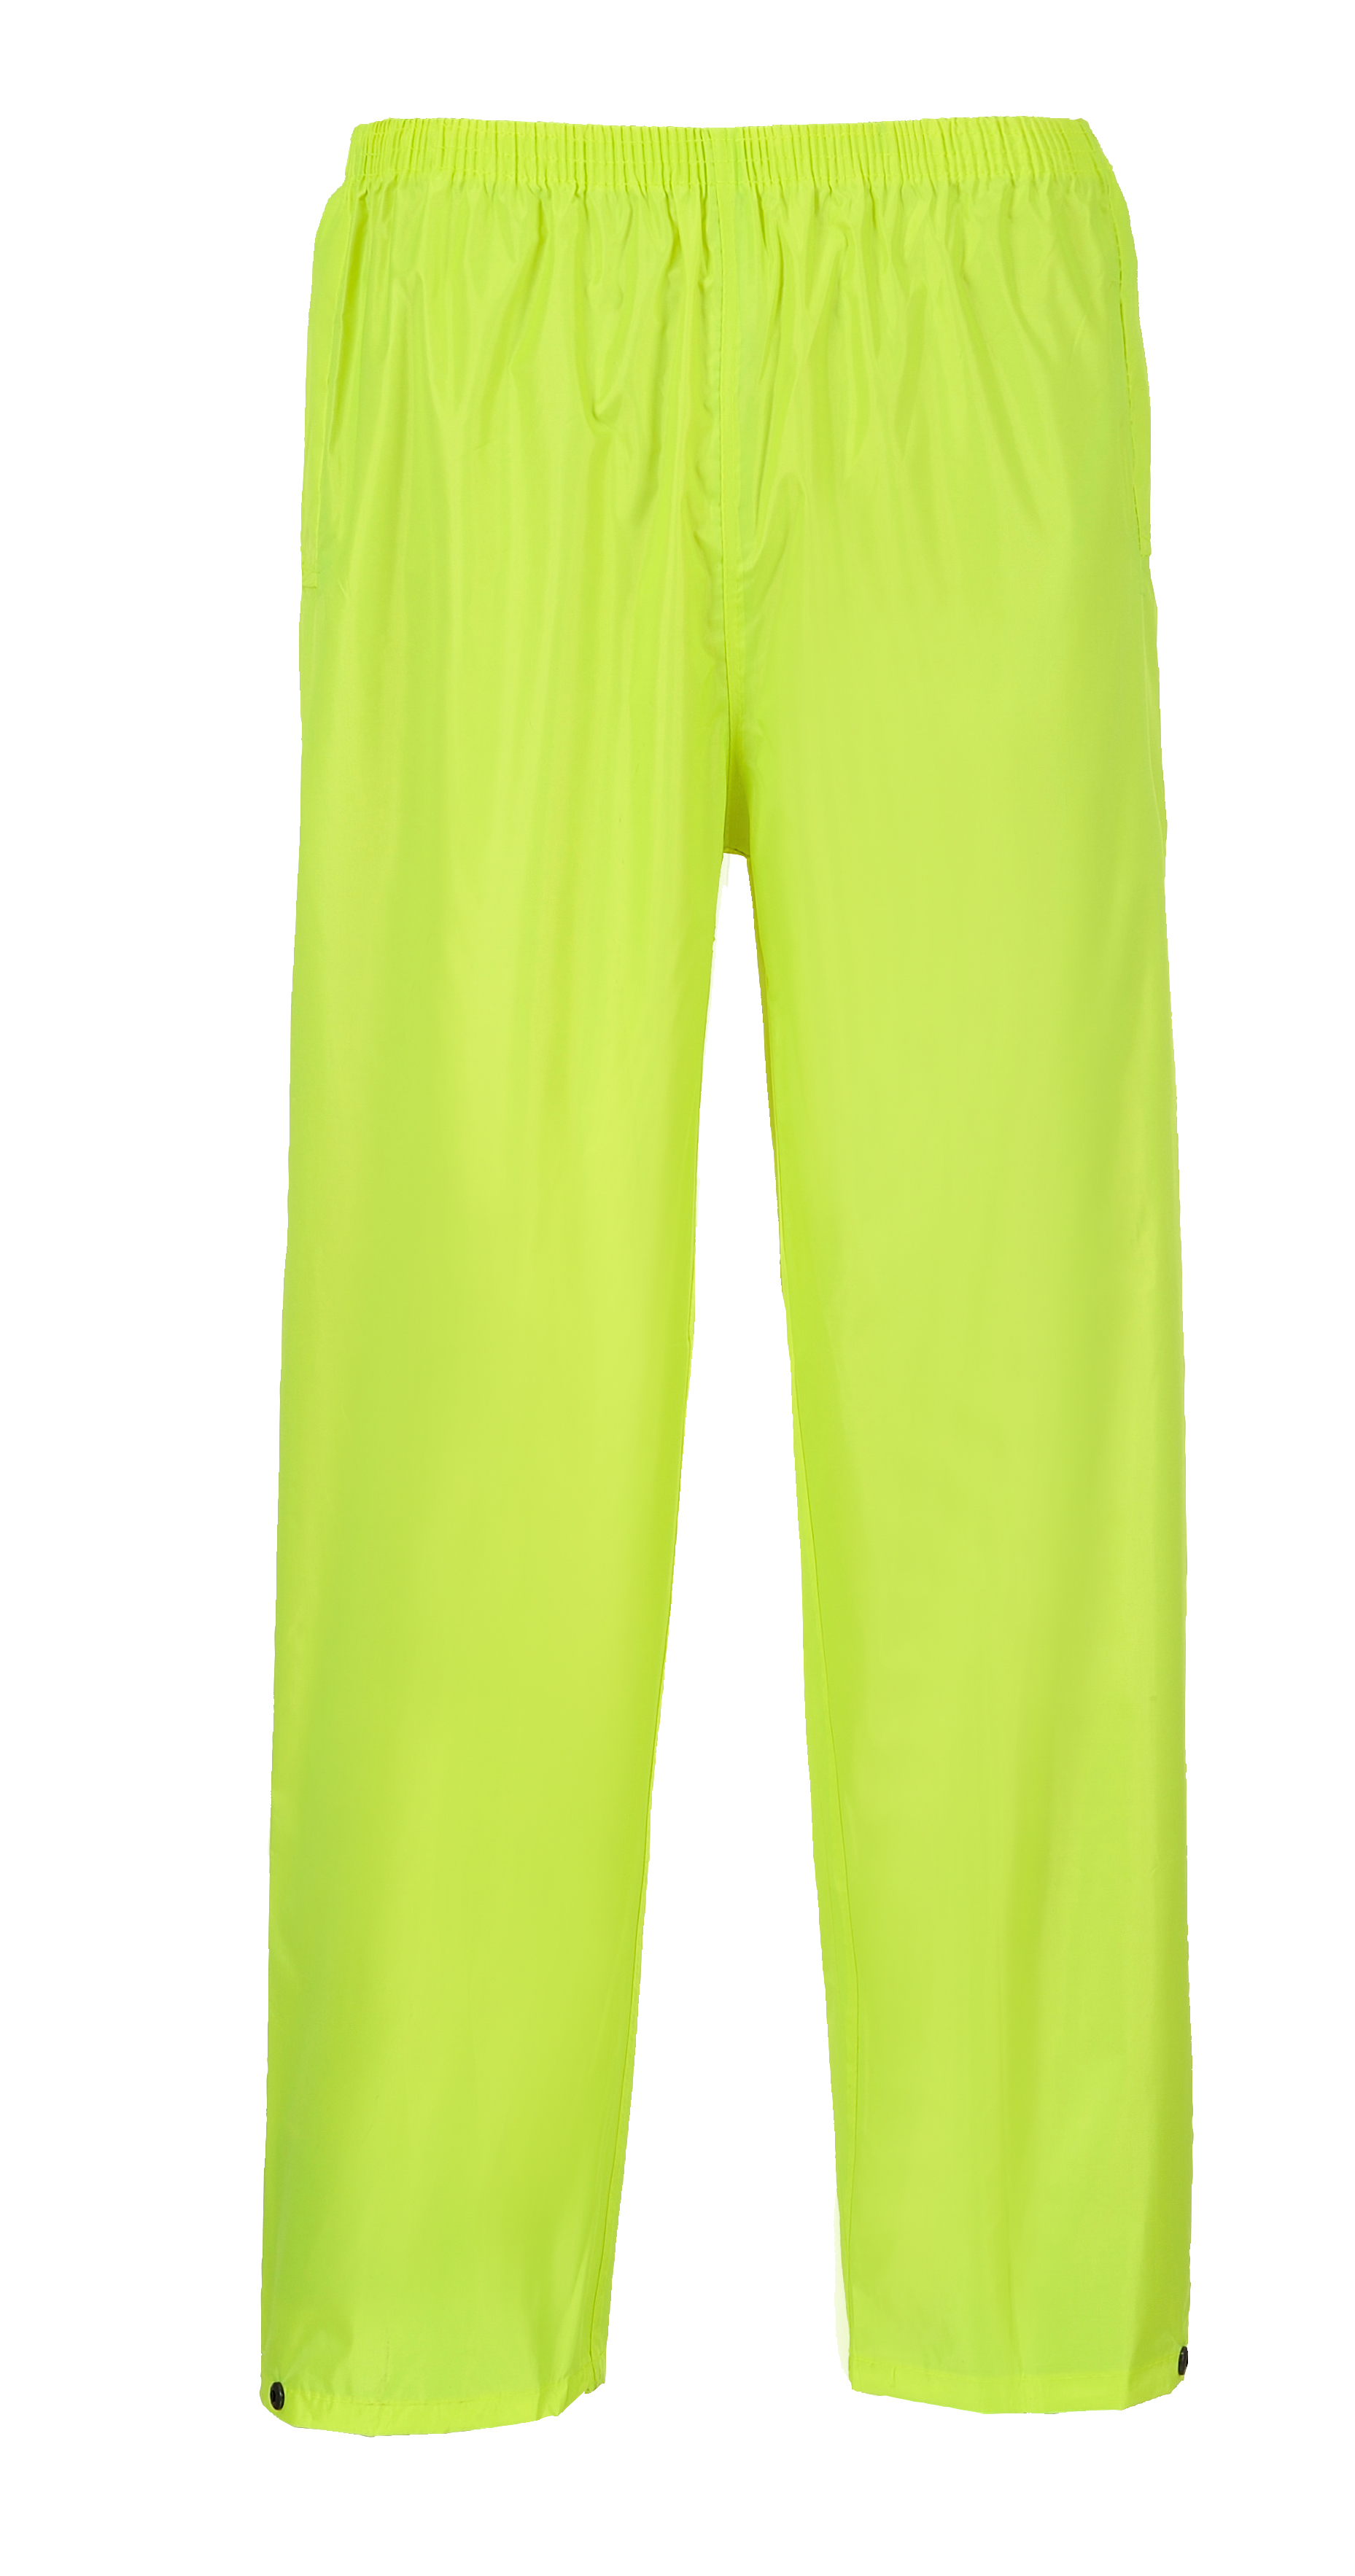 ax-httpss3.eu-west-2.amazonaws.comwebsystemstmp_for_downloadportwest-classic-adult-rain-trousers-yellow.jpeg